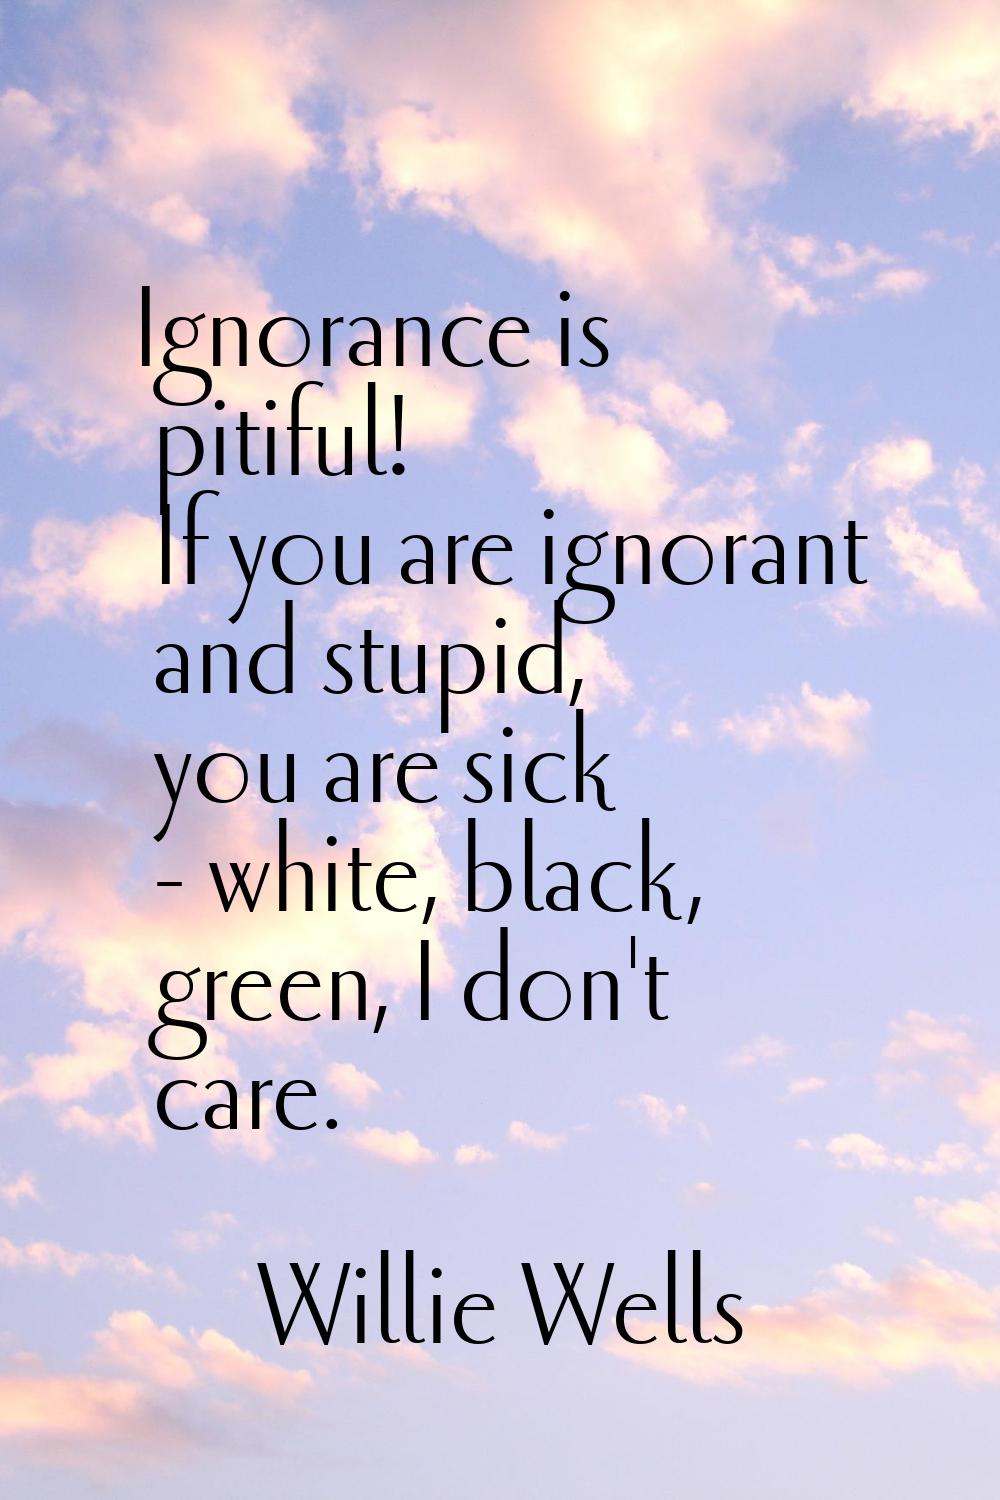 Ignorance is pitiful! If you are ignorant and stupid, you are sick - white, black, green, I don't c